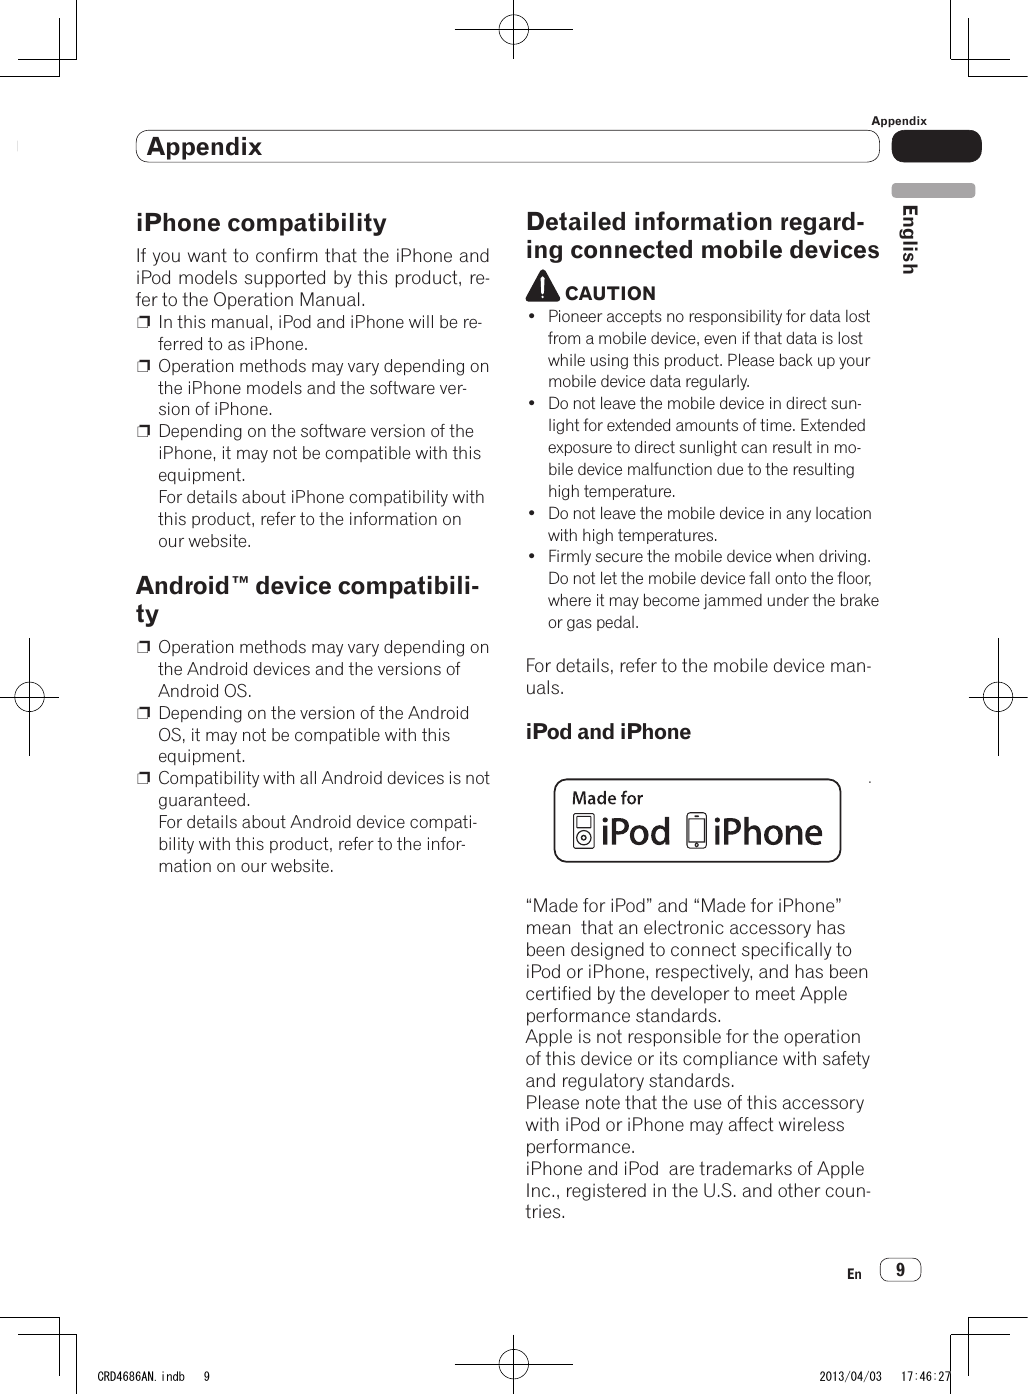 AppendixAppendix9EnEnglishNotes before using this productiPhone compatibilityIf you want to confirm that the iPhone and iPod models supported by this product, re-fer to the Operation Manual.p  In this manual, iPod and iPhone will be re-ferred to as iPhone.p  Operation methods may vary depending on the iPhone models and the software ver-sion of iPhone.p  Depending on the software version of the iPhone, it may not be compatible with this equipment. For details about iPhone compatibility with this product, refer to the information on our website.Android™ device compatibili-typ  Operation methods may vary depending on the Android devices and the versions of  Android OS.p  Depending on the version of the Android OS, it may not be compatible with this equipment.p  Compatibility with all Android devices is not guaranteed.  For details about Android device compati-bility with this product, refer to the infor-mation on our website.Detailed information regard-ing connected mobile devices CAUTION• Pioneer accepts no responsibility for data lost from a mobile device, even if that data is lost while using this product. Please back up your mobile device data regularly.• Do not leave the mobile device in direct sun-light for extended amounts of time. Extended exposure to direct sunlight can result in mo-bile device malfunction due to the resulting high temperature.• Do not leave the mobile device in any location with high temperatures.• Firmly secure the mobile device when driving. Do not let the mobile device fall onto the floor, where it may become jammed under the brake or gas pedal.For details, refer to the mobile device man-uals.iPod and iPhone•For details, refer to the mobile device man-uals.iPod and iPhone“Made for iPod” and “Made for iPhone” mean  that an electronic accessory has been designed to connect specifically to  iPod or iPhone, respectively, and has been certified by the developer to meet Apple performance standards.Apple is not responsible for the operation of this device or its compliance with safety and regulatory standards.Please note that the use of this accessory with iPod or iPhone may affect wireless performance.iPhone and iPod  are trademarks of Apple Inc., registered in the U.S. and other coun-tries.SPH-DA210CRD4686AN.indb   9 2013/04/03   17:46:27